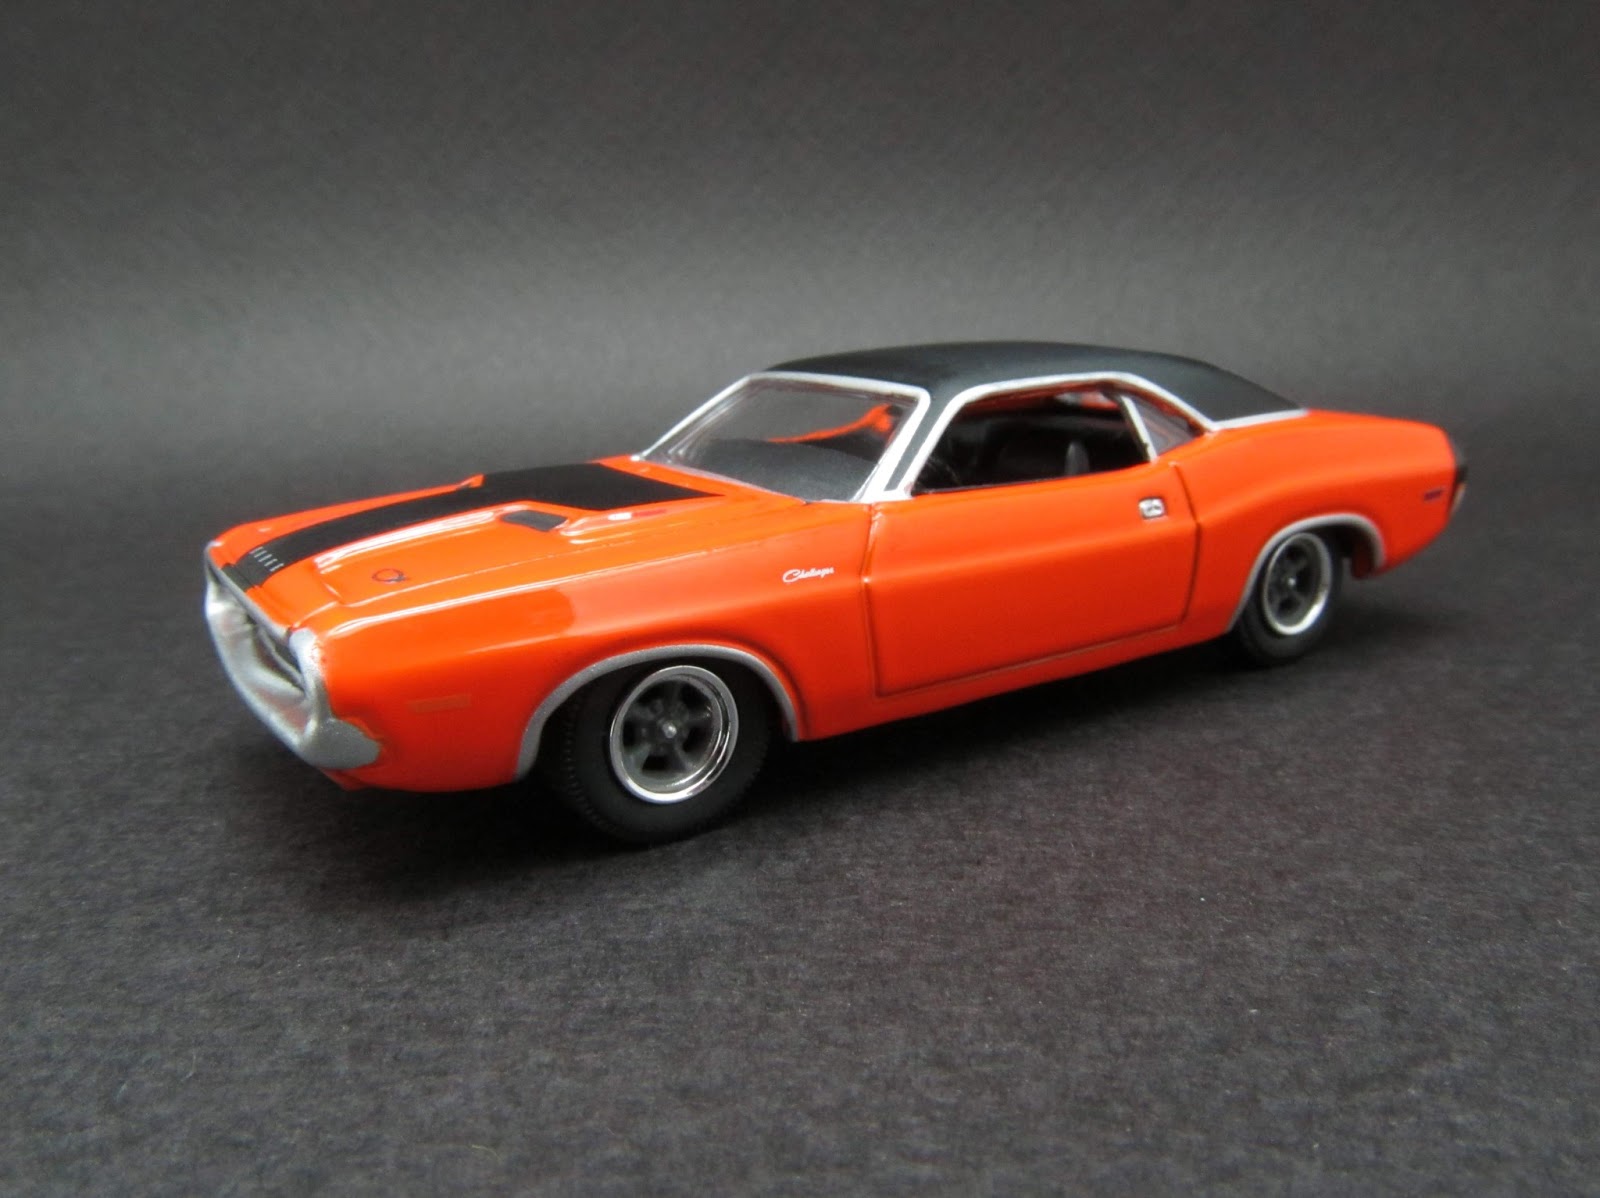 64 Scale Diecast From Greenlight Hollywood Series 1